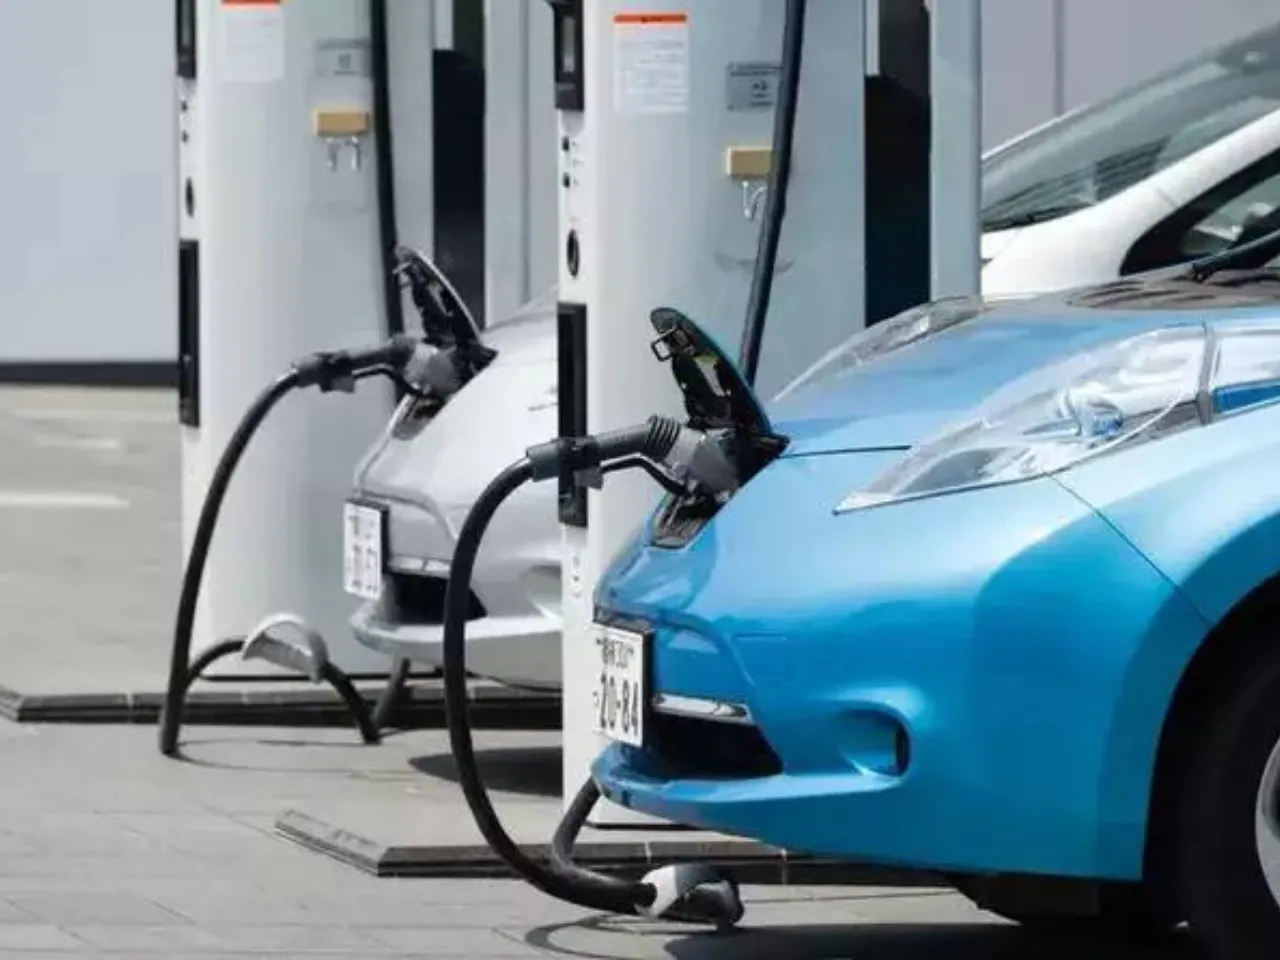 Indian conglomerate Rana Group plans to invest Rs 1,900 crore in EV business